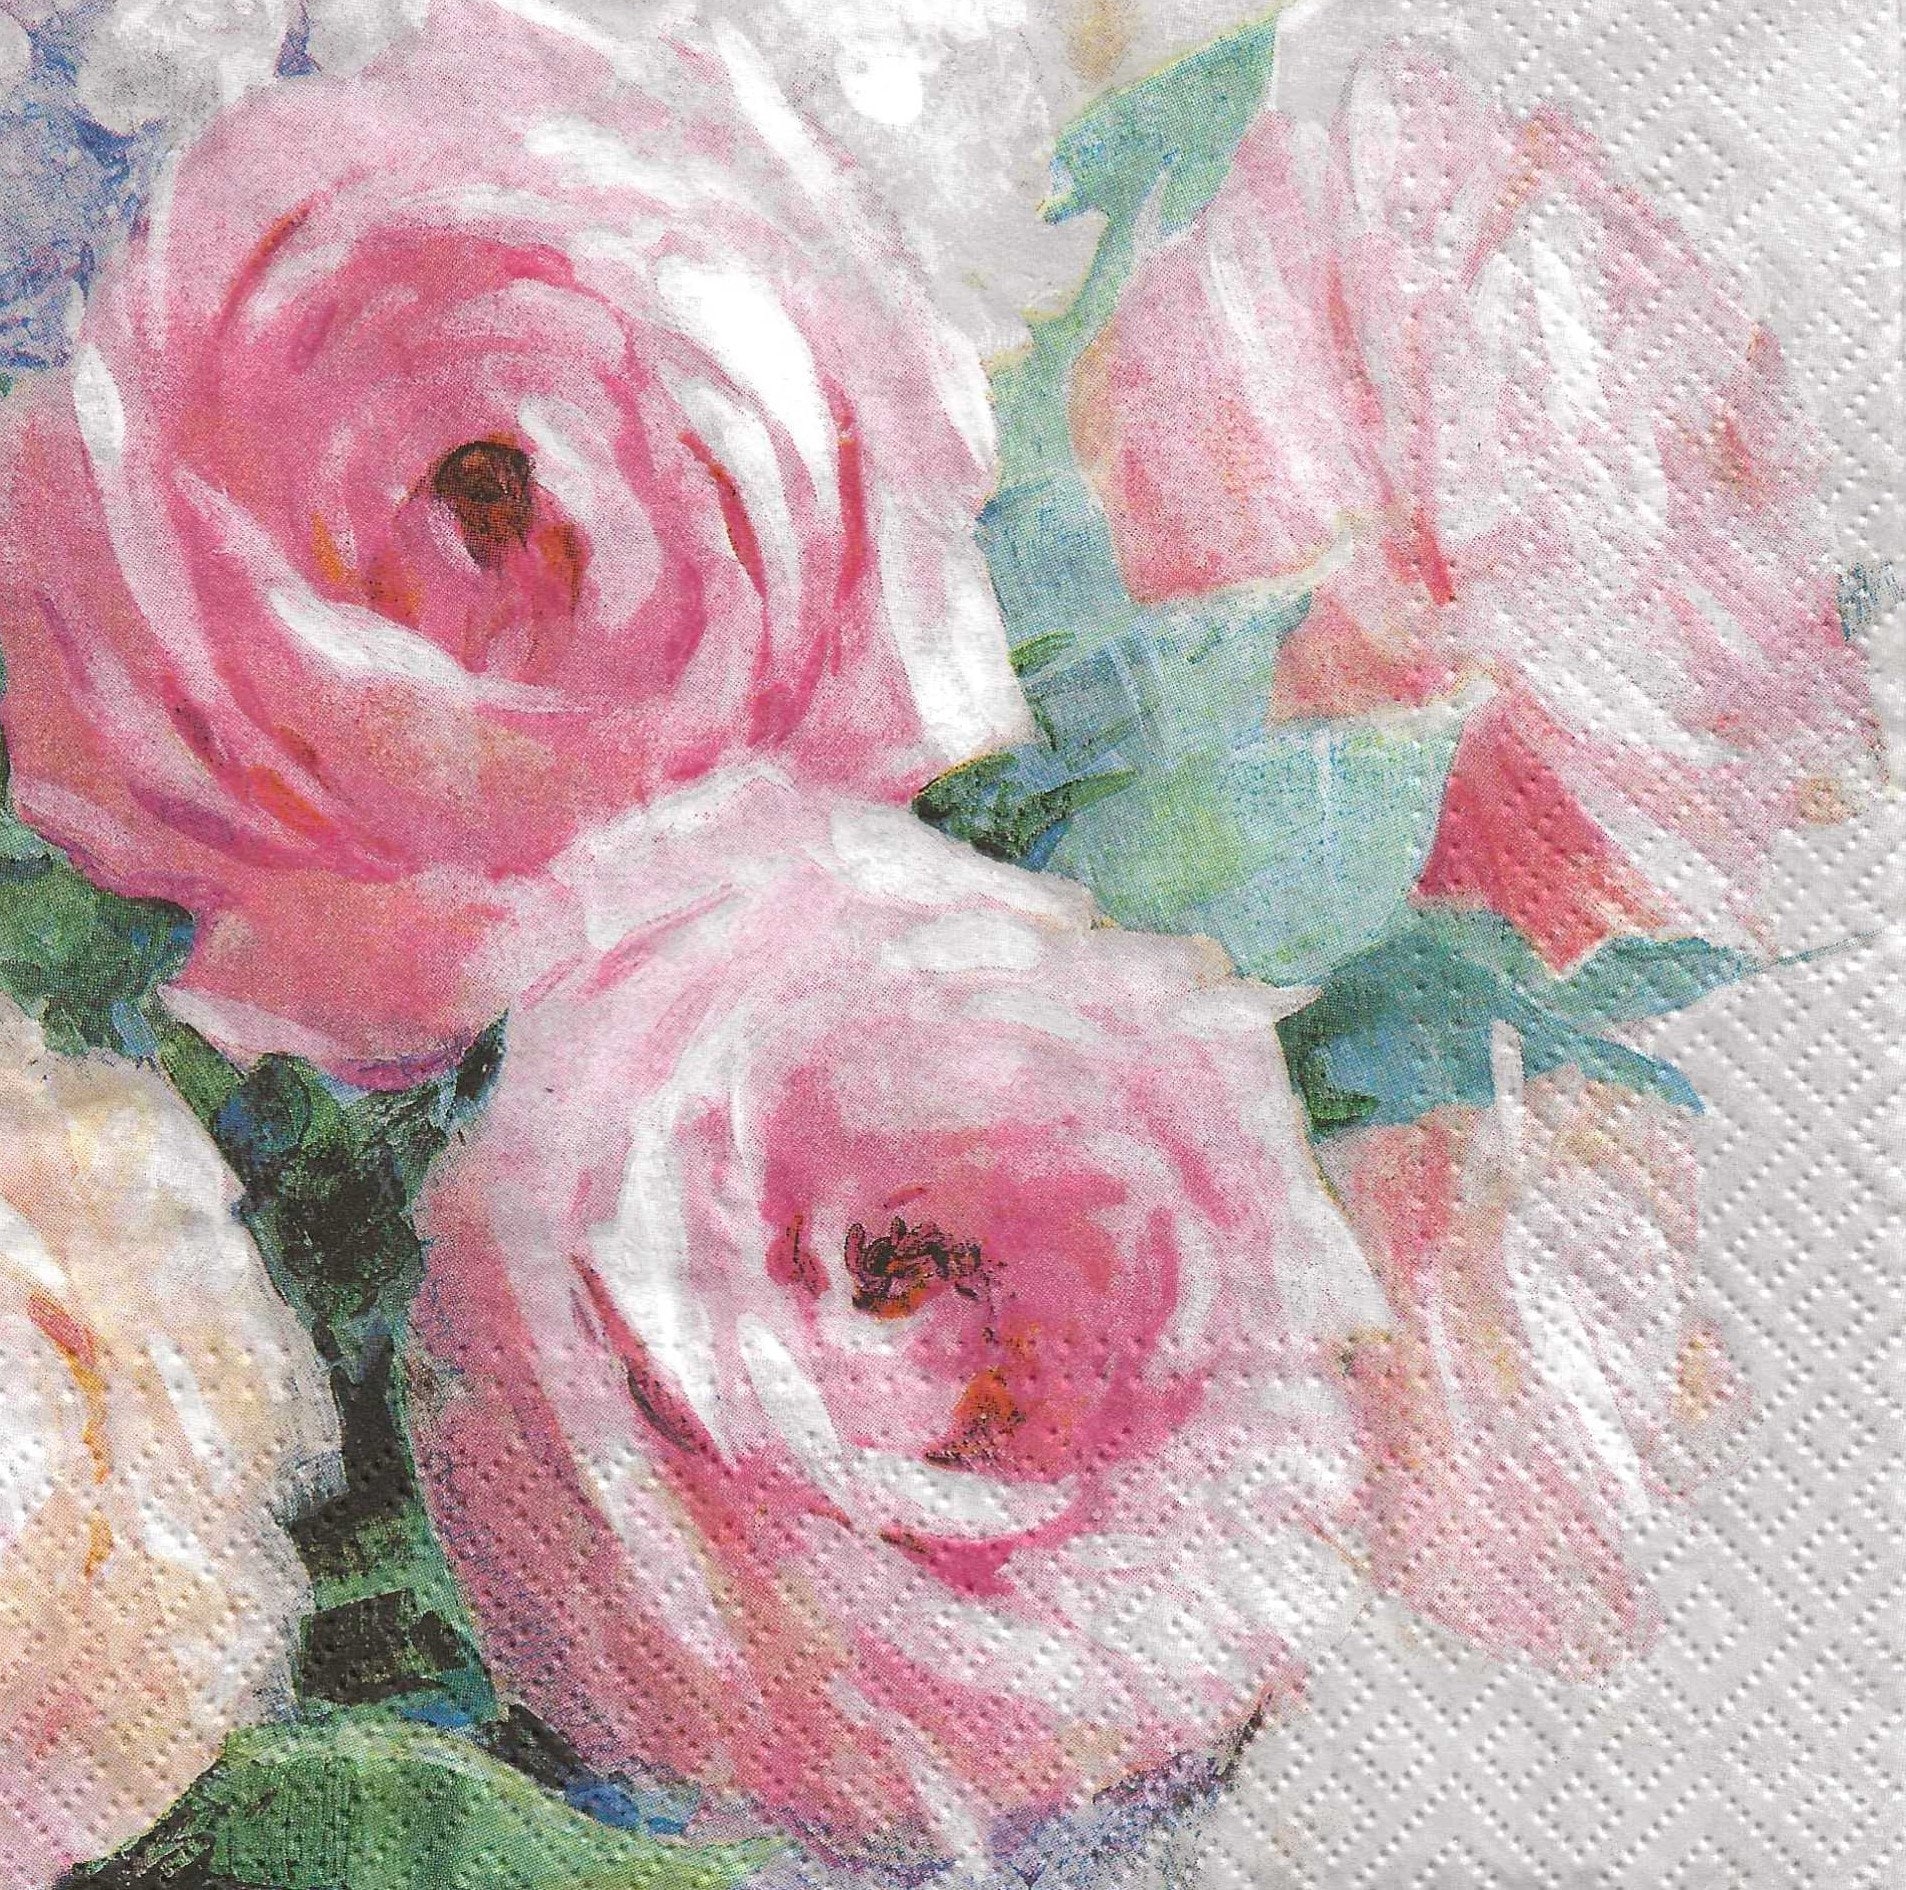 4x Decoupage Napkins with Drawn Pink Roses 3ply Luncheon Floral Paper  Napkins